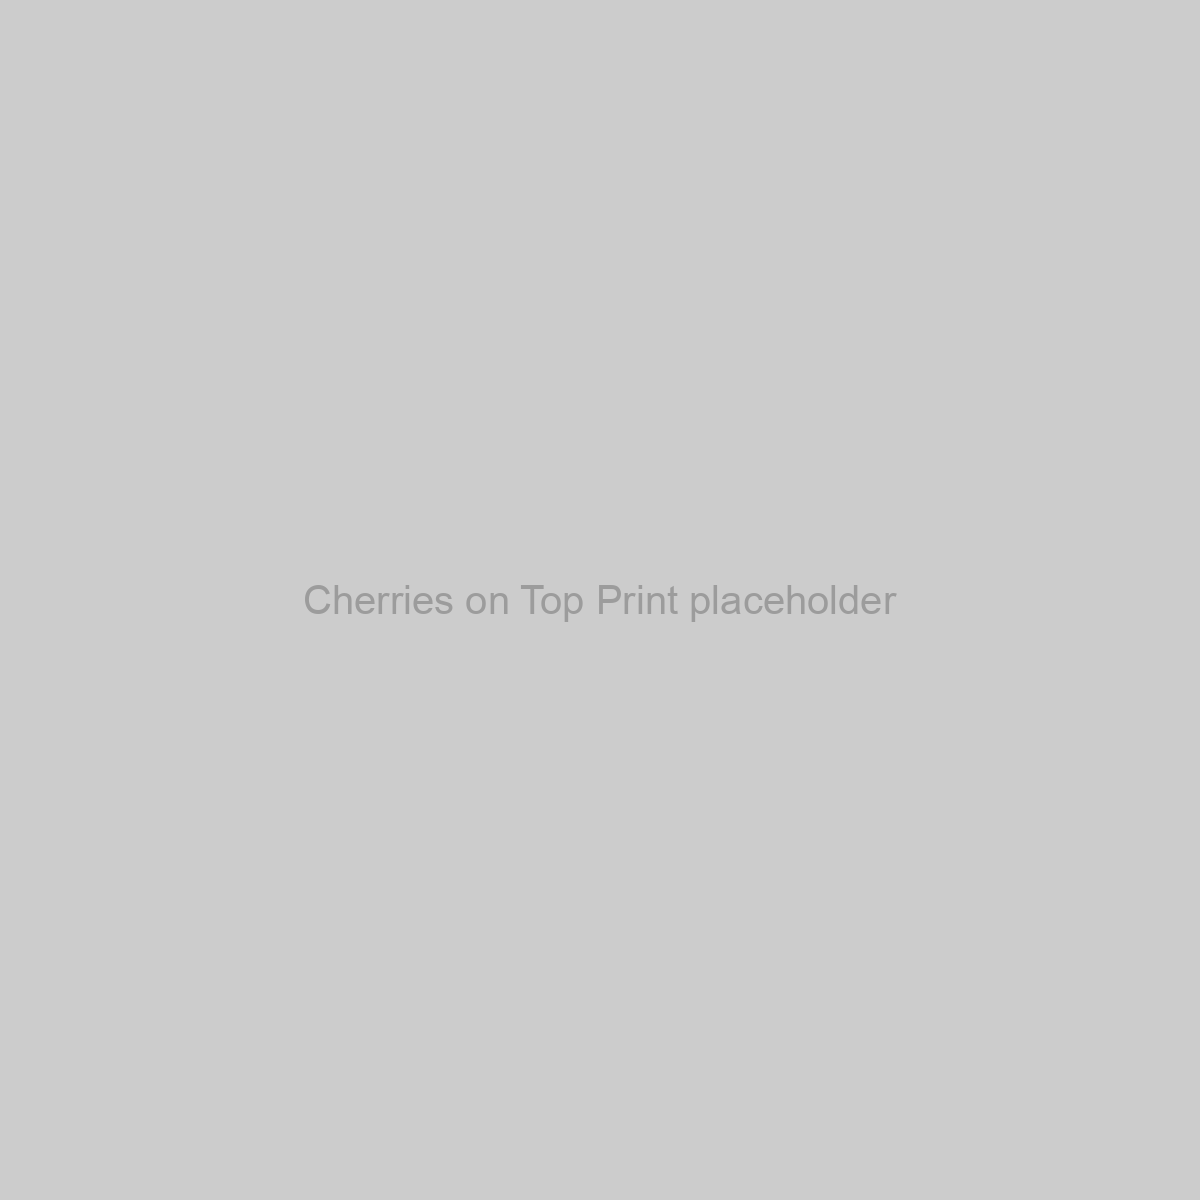 Cherries on Top Print Placeholder Image